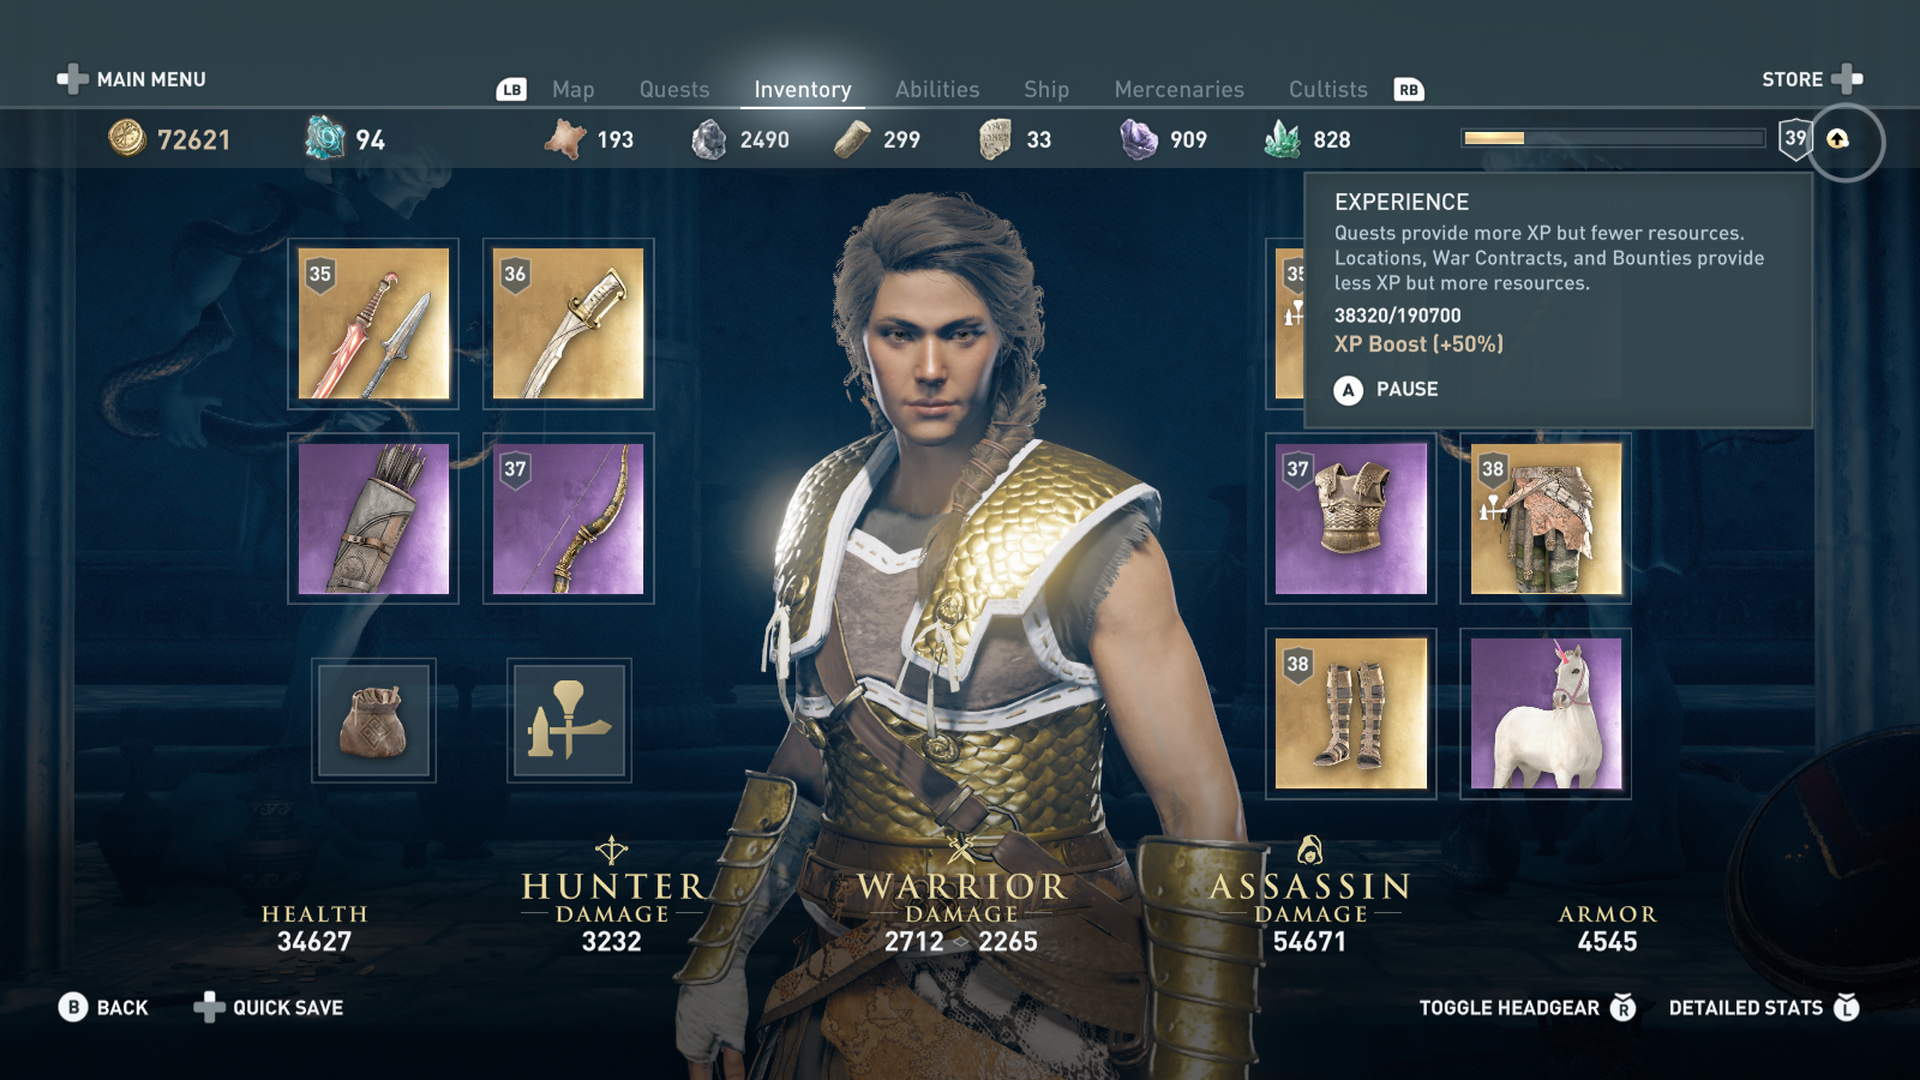 image of Kassandra in menu in Assassin's Creed Odyssey